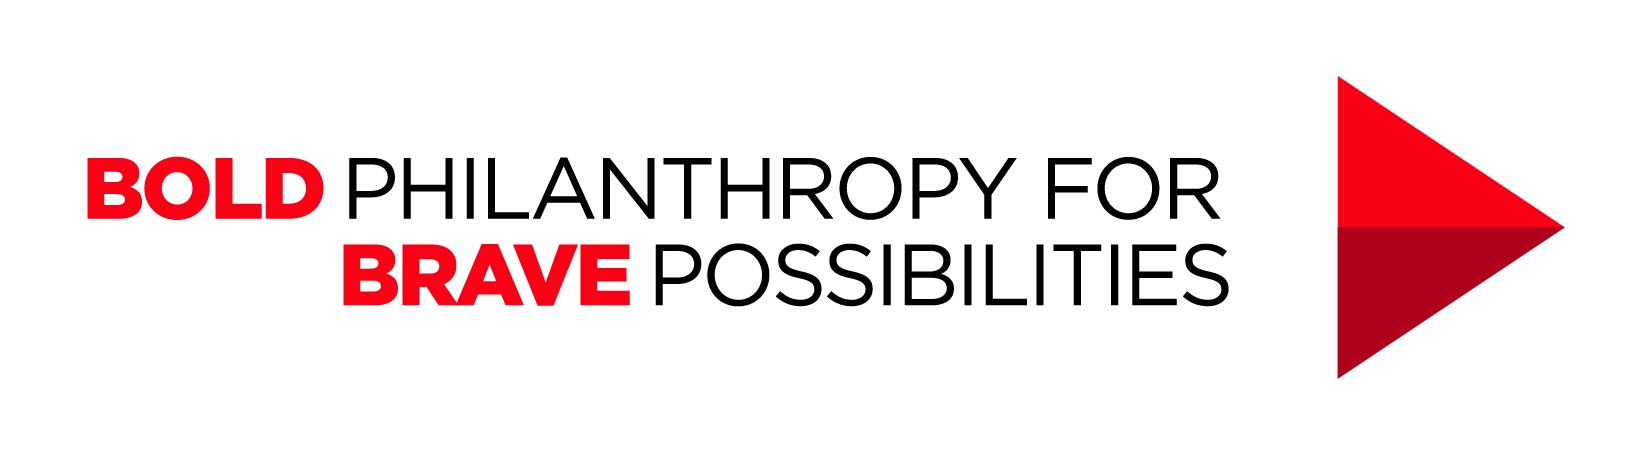 Bold Philanthropy for Brave Possibilities